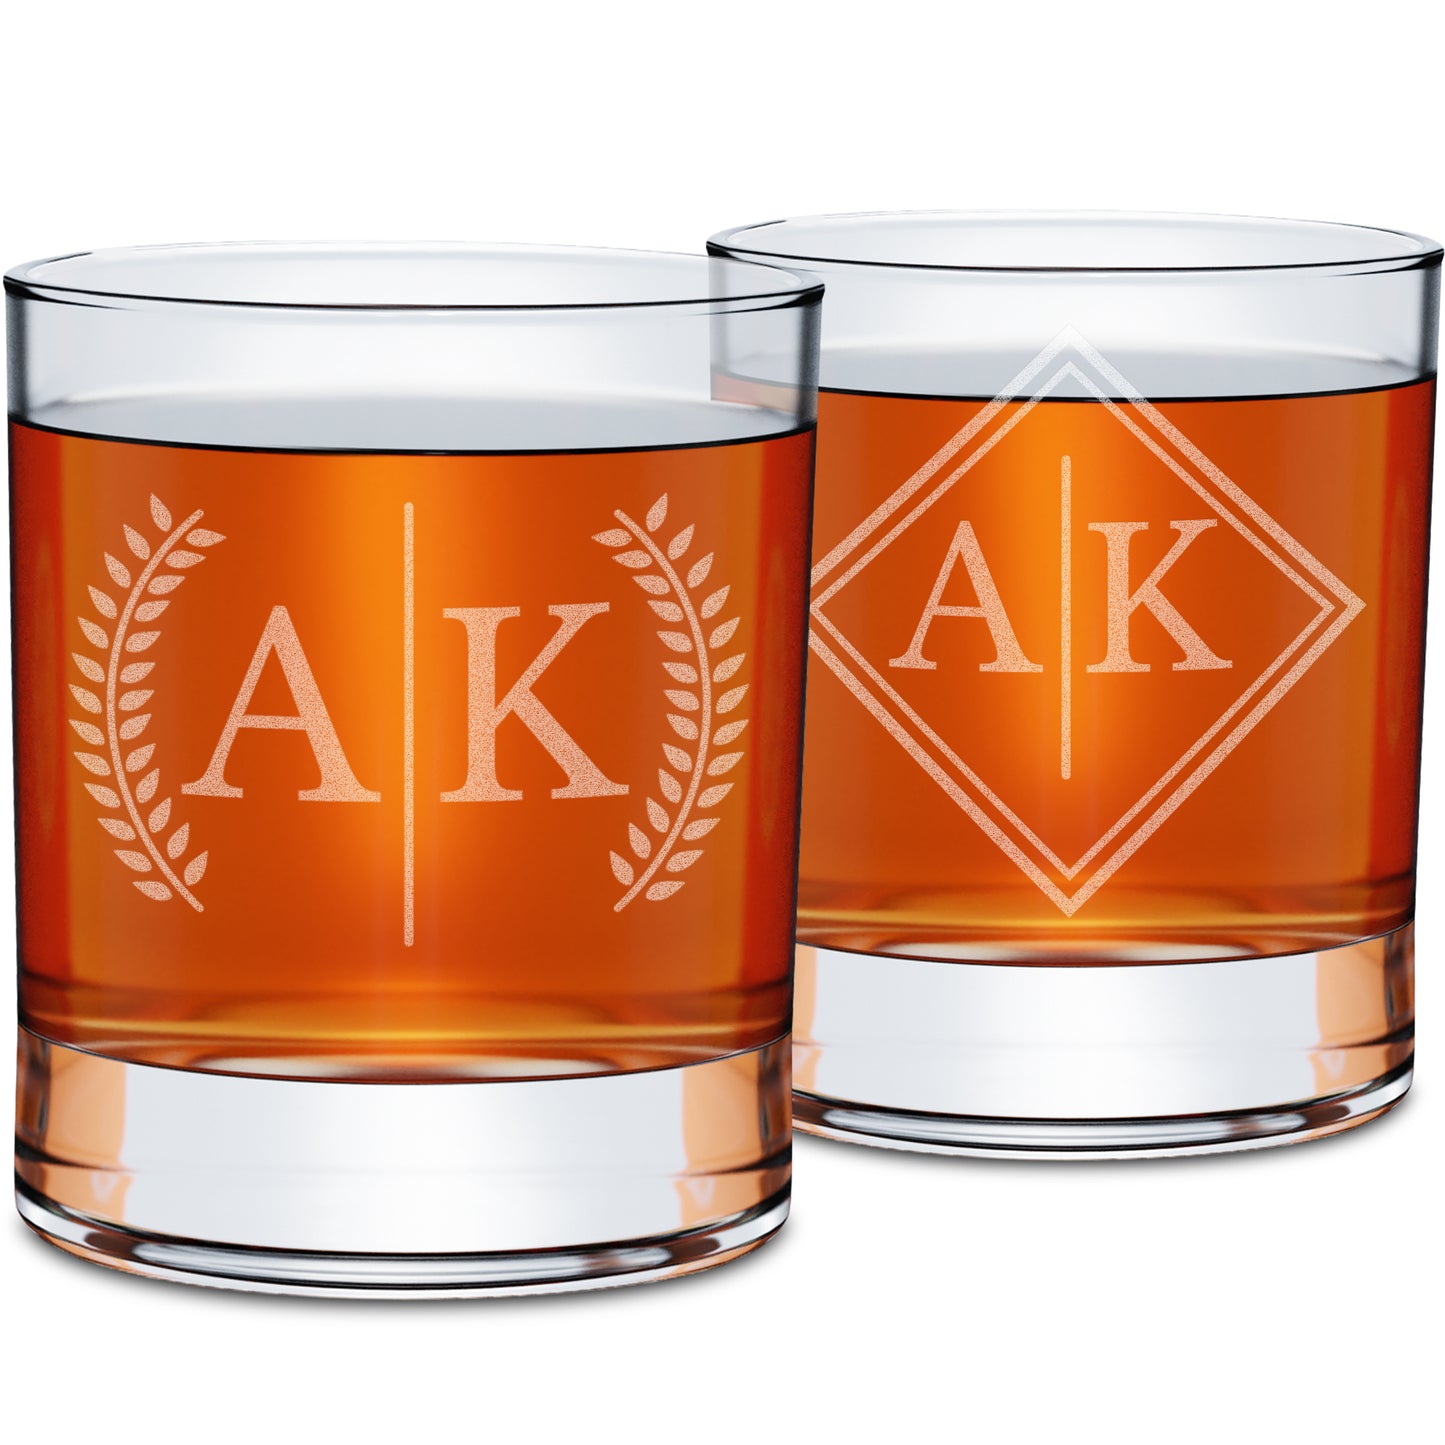 On The Rox Drinks Personalized Whiskey Gifts for Men - 11 oz Engraved Split Monogrammed Whiskey Glass Set of 2 - Customized Cocktail Glass - Bourbon, Scotch, Rocks, Brandy